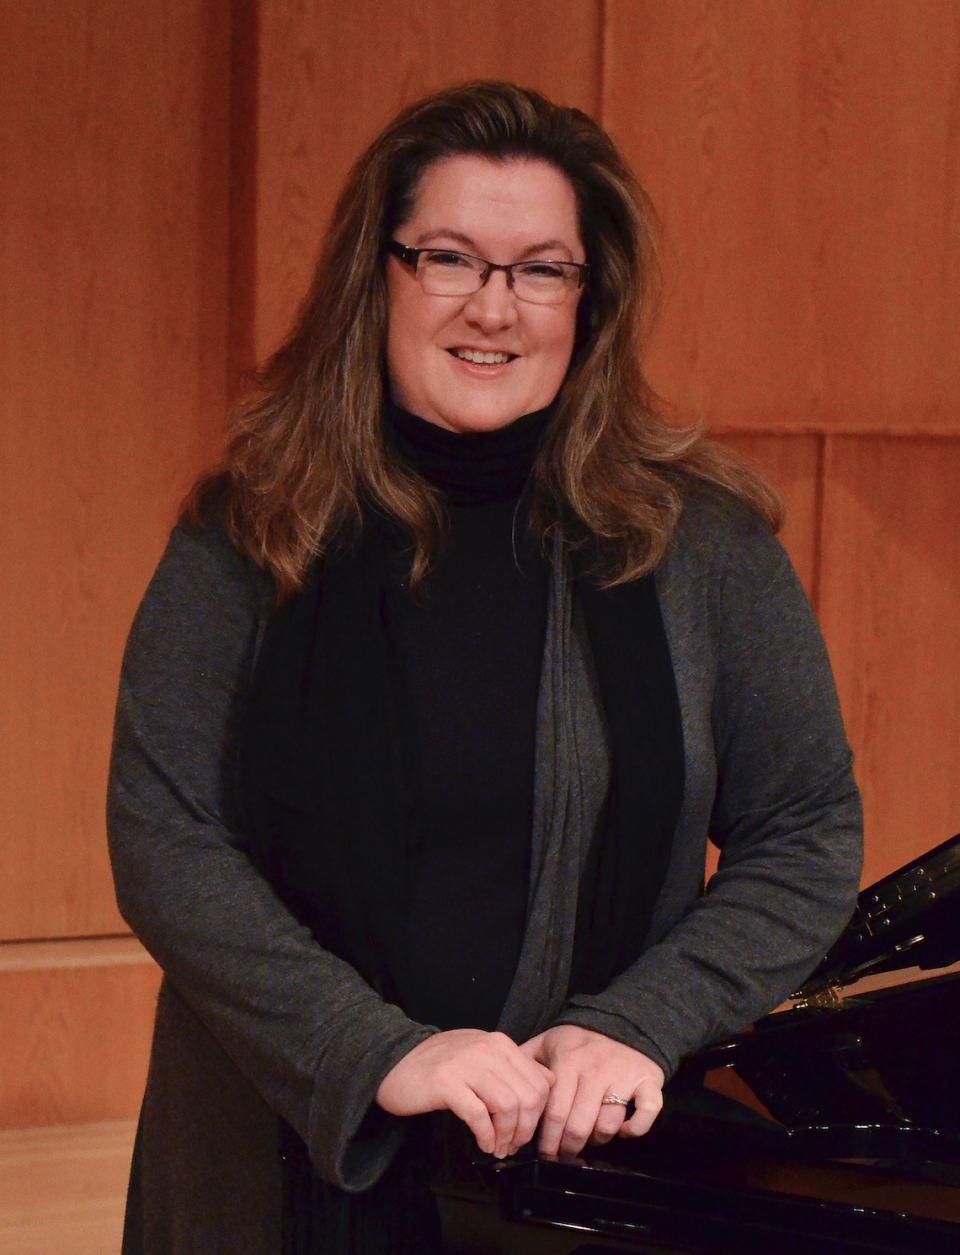 Jennifer Hayghe, an acclaimed soloist and chamber musician, will perform Friday to open the 2024 Grace Hamilton Piano Festival at West Texas A&M University.